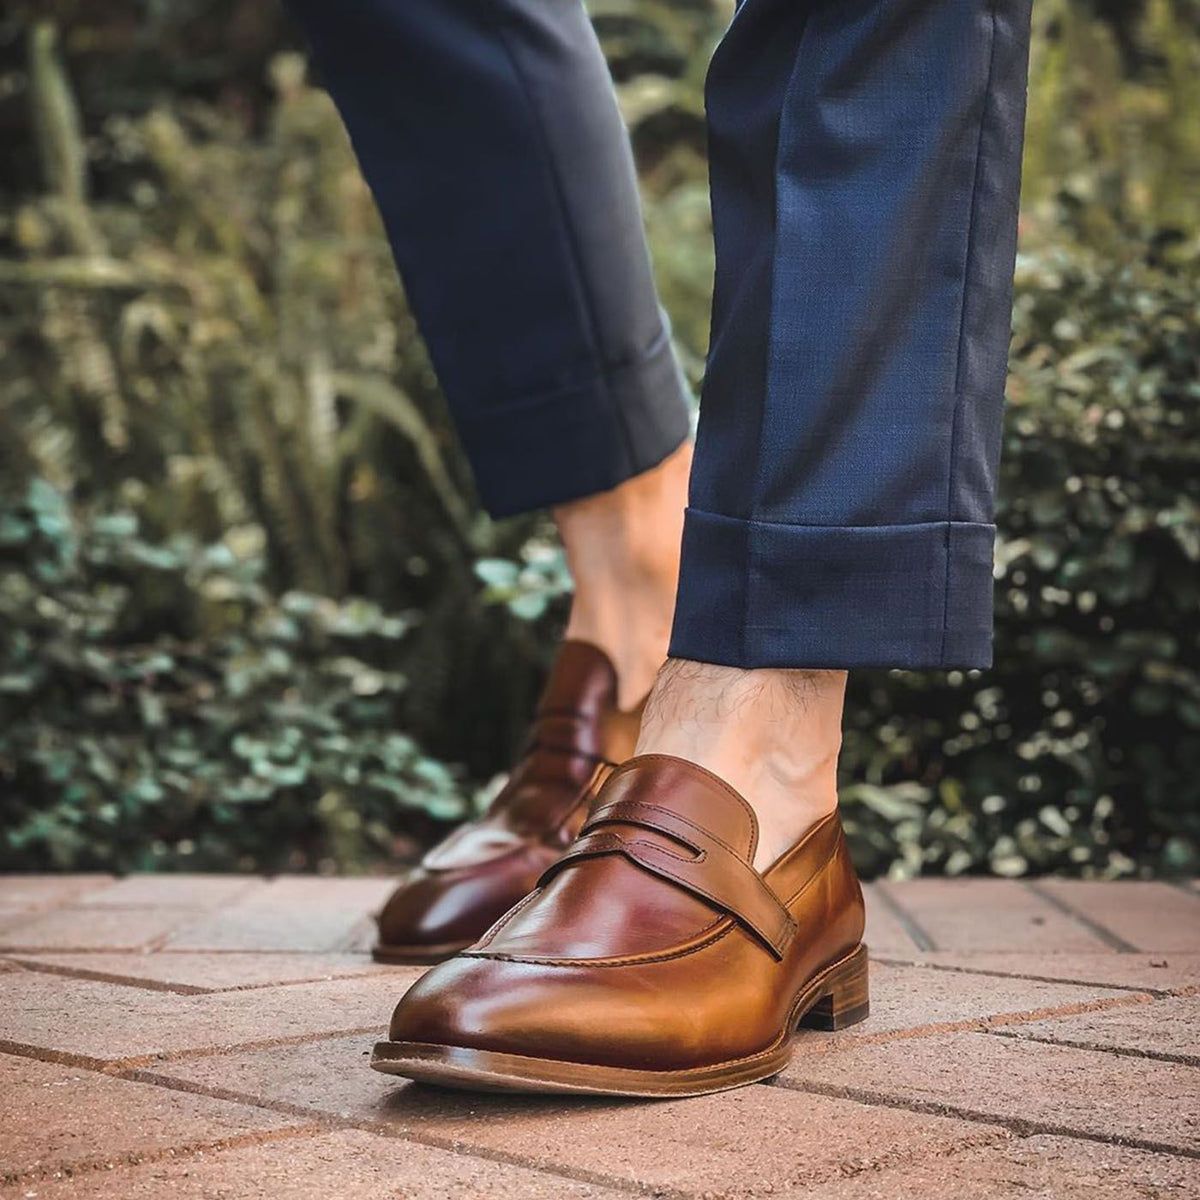 Classic Comfort: Stay Stylish in Loafers for Men